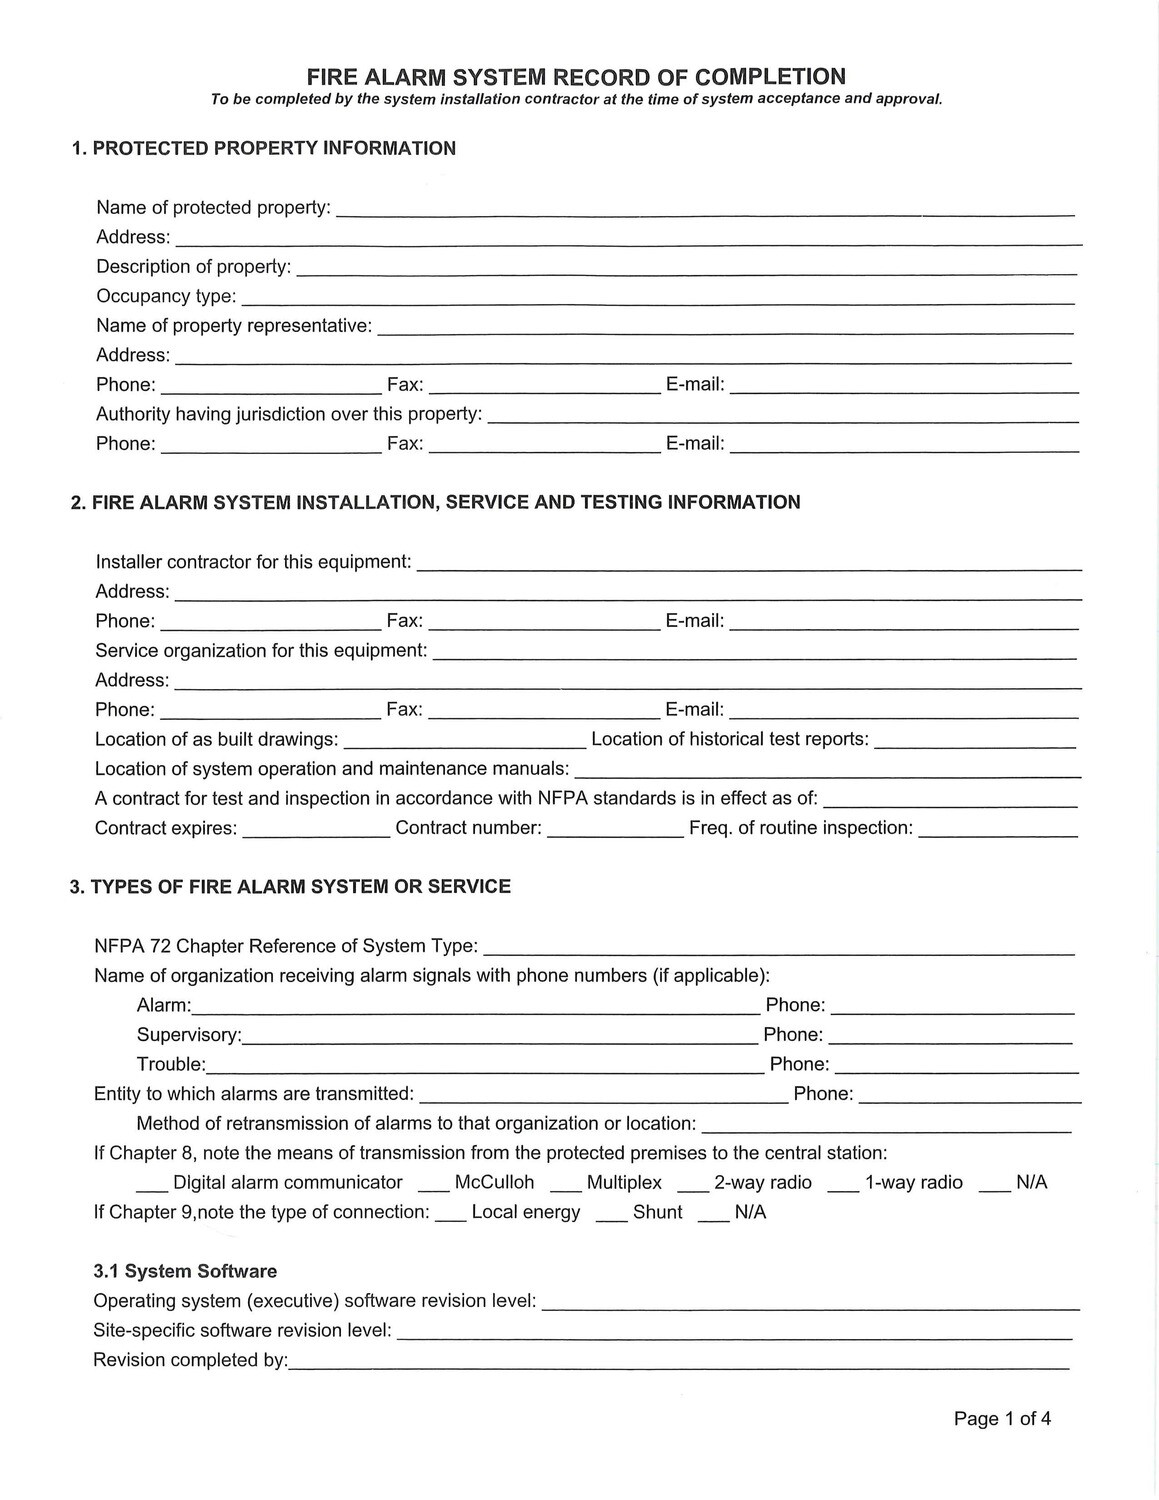 Fire Alarm Record of Completion Forms 2007